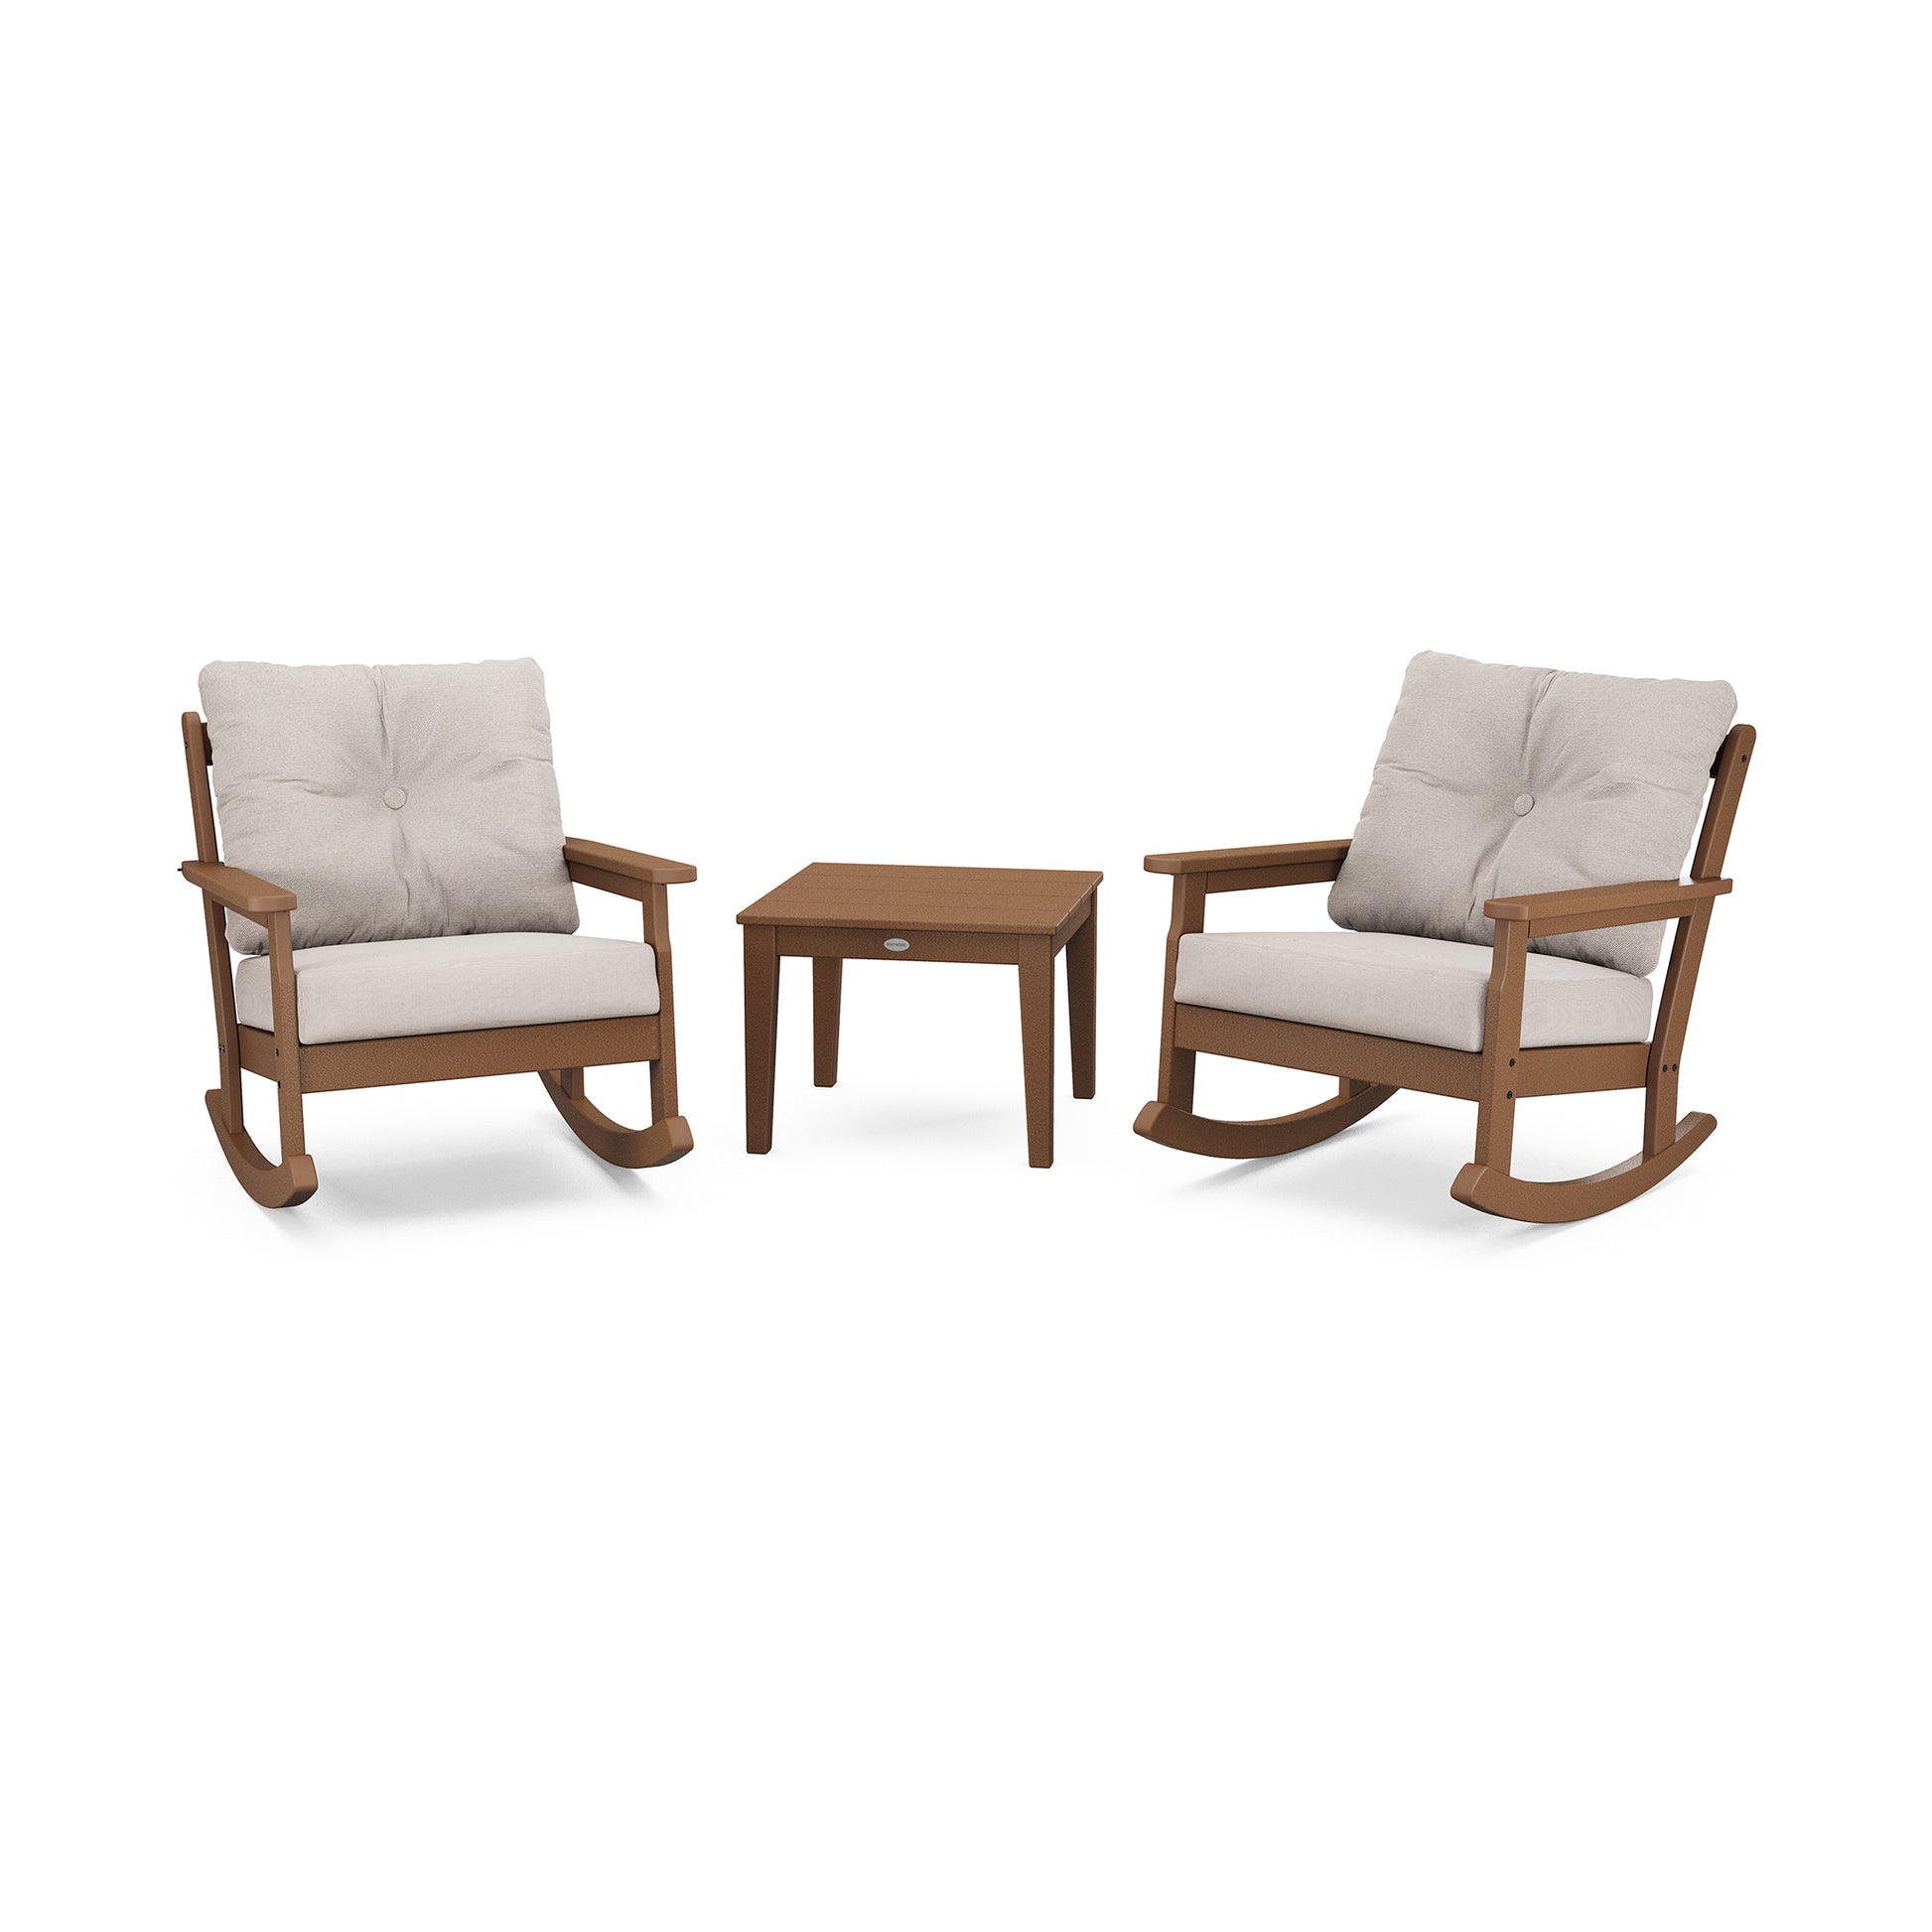 Two POLYWOOD Vineyard 3-Piece Deep Seating Rocker Sets with beige cushions flanking a small square wooden side table, all set on a plain white background.